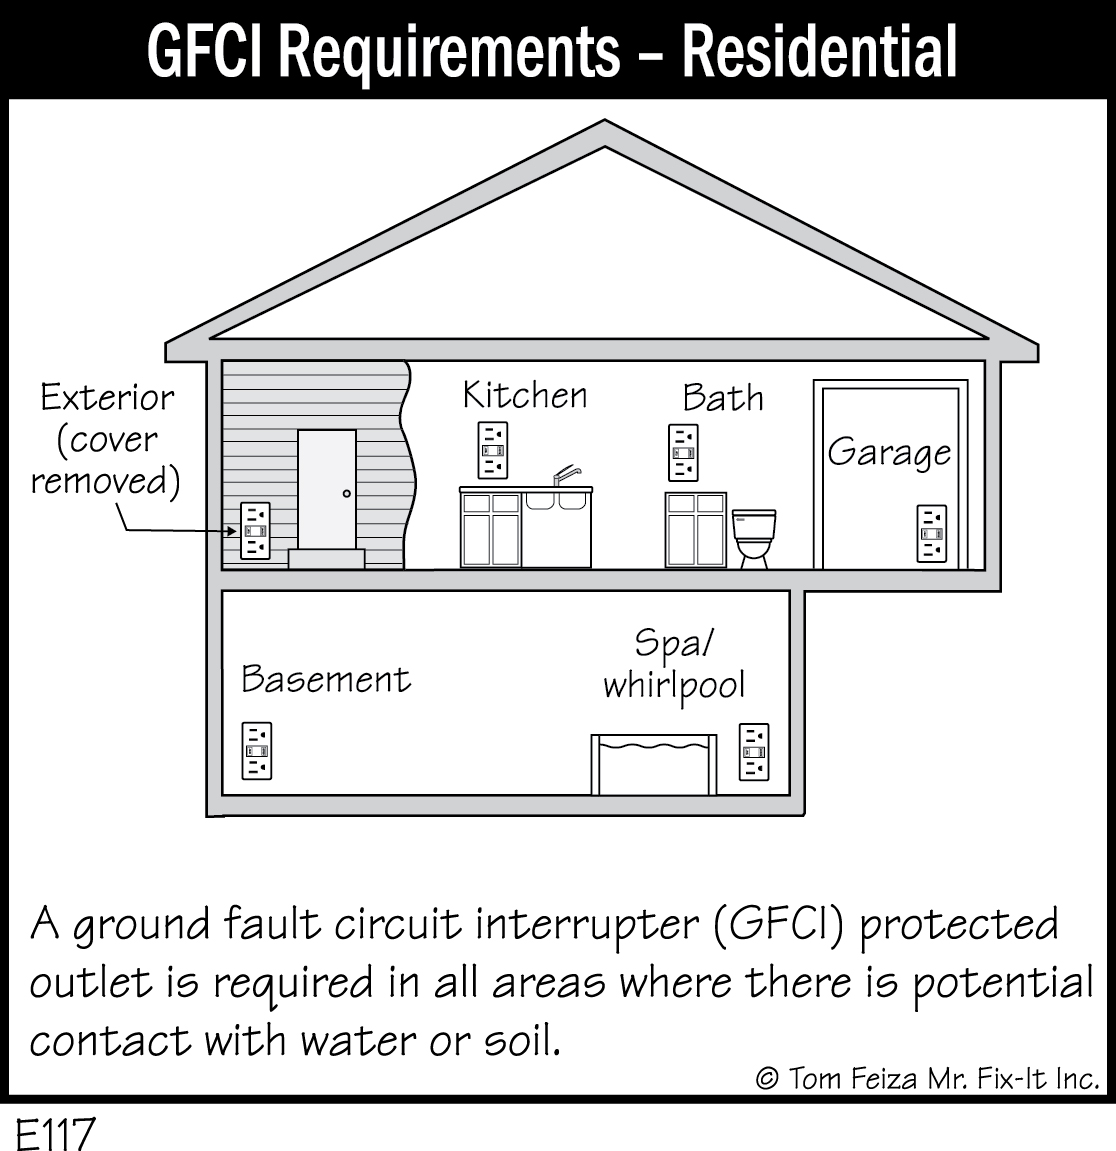 E117 - GFCI Requirements - Residential